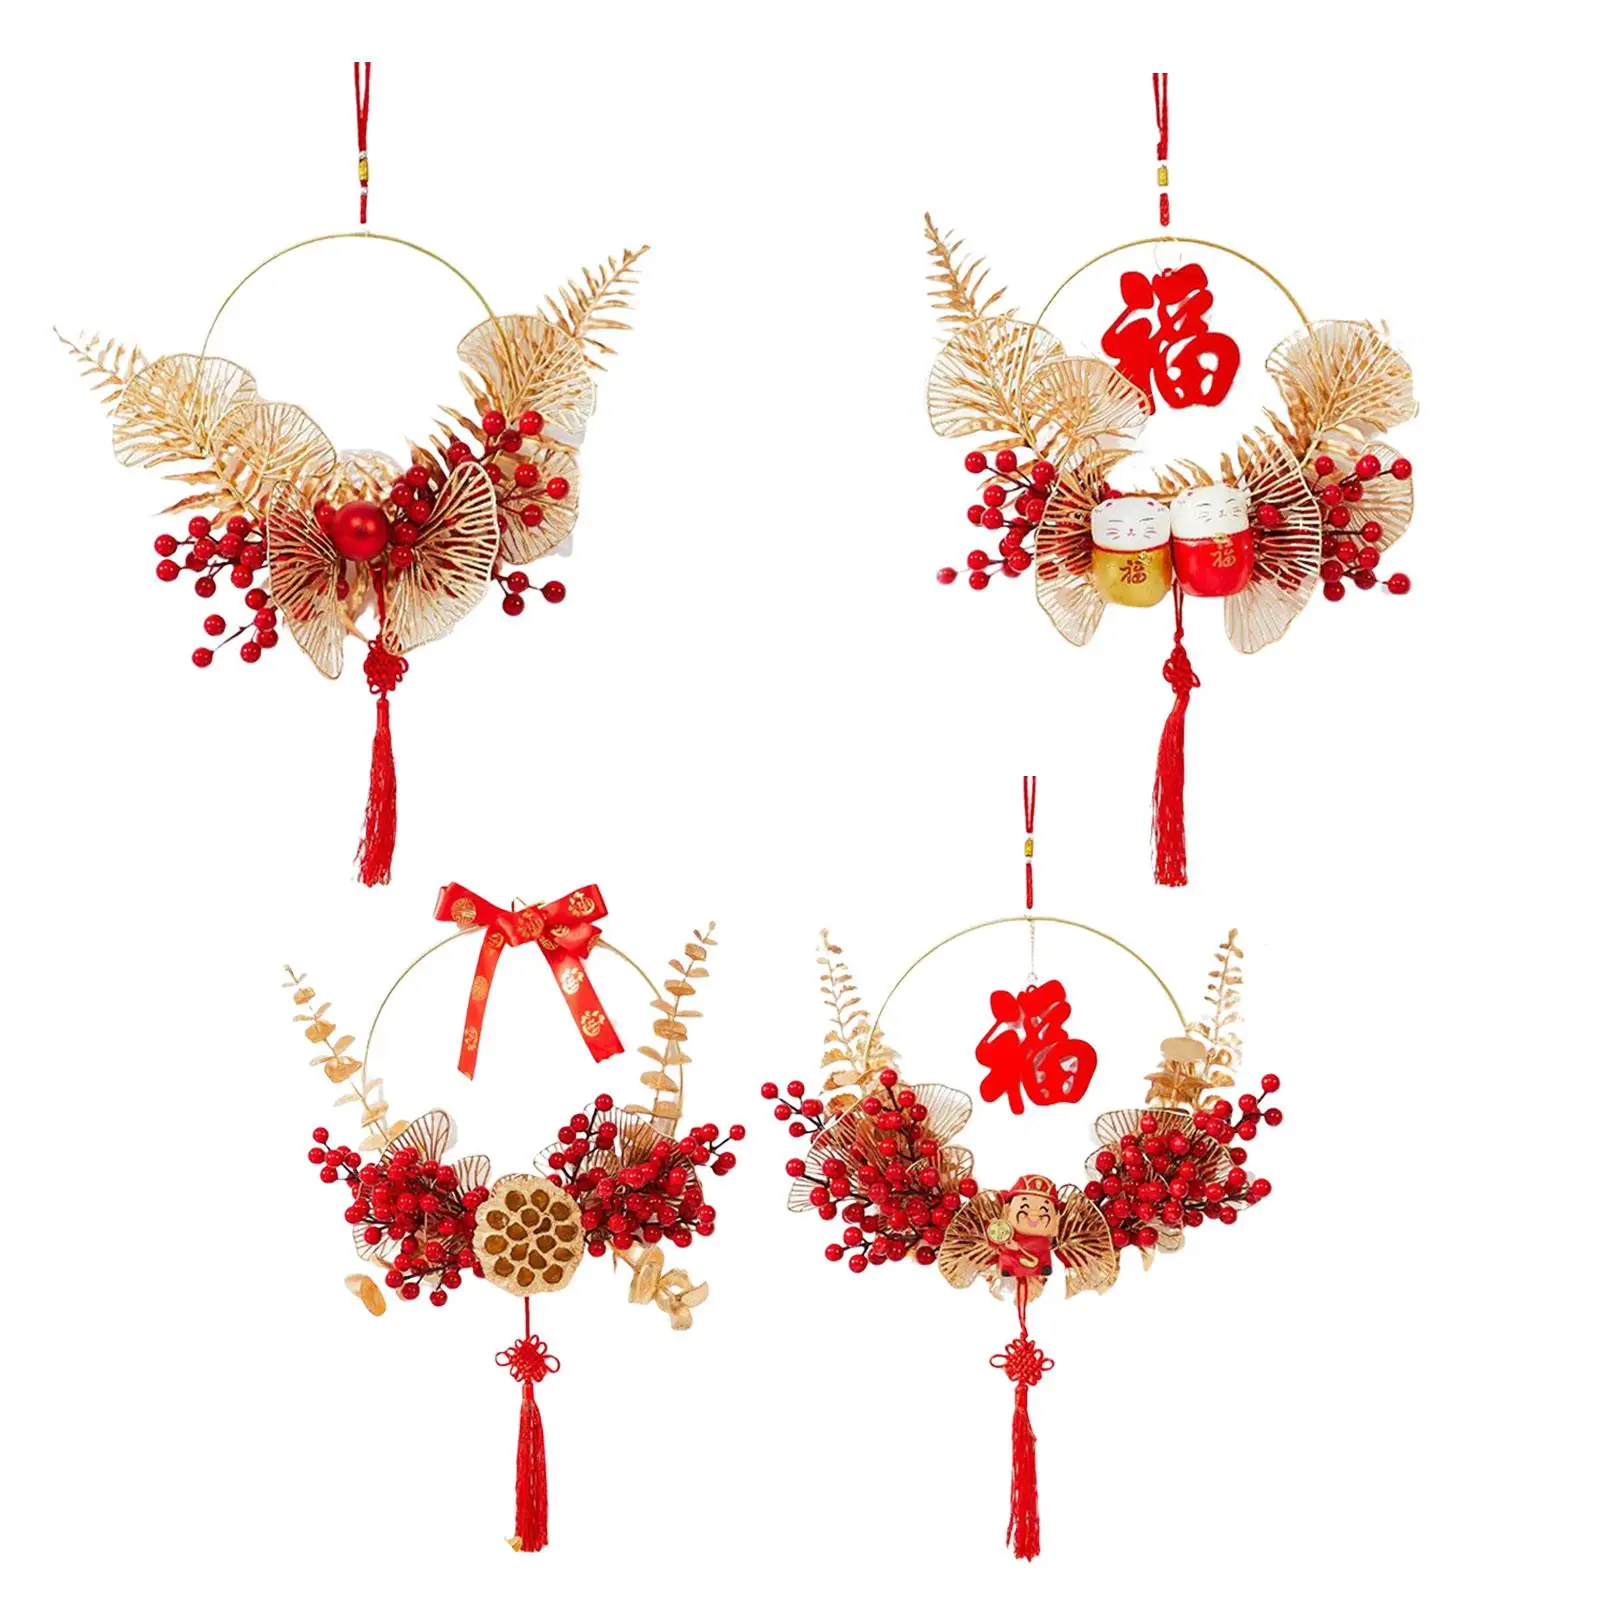 Handcraft Chinese New Year Wreath with Chinese Knot Tassel Fu Character Adornment Hanging Garland for Door Tree Decor